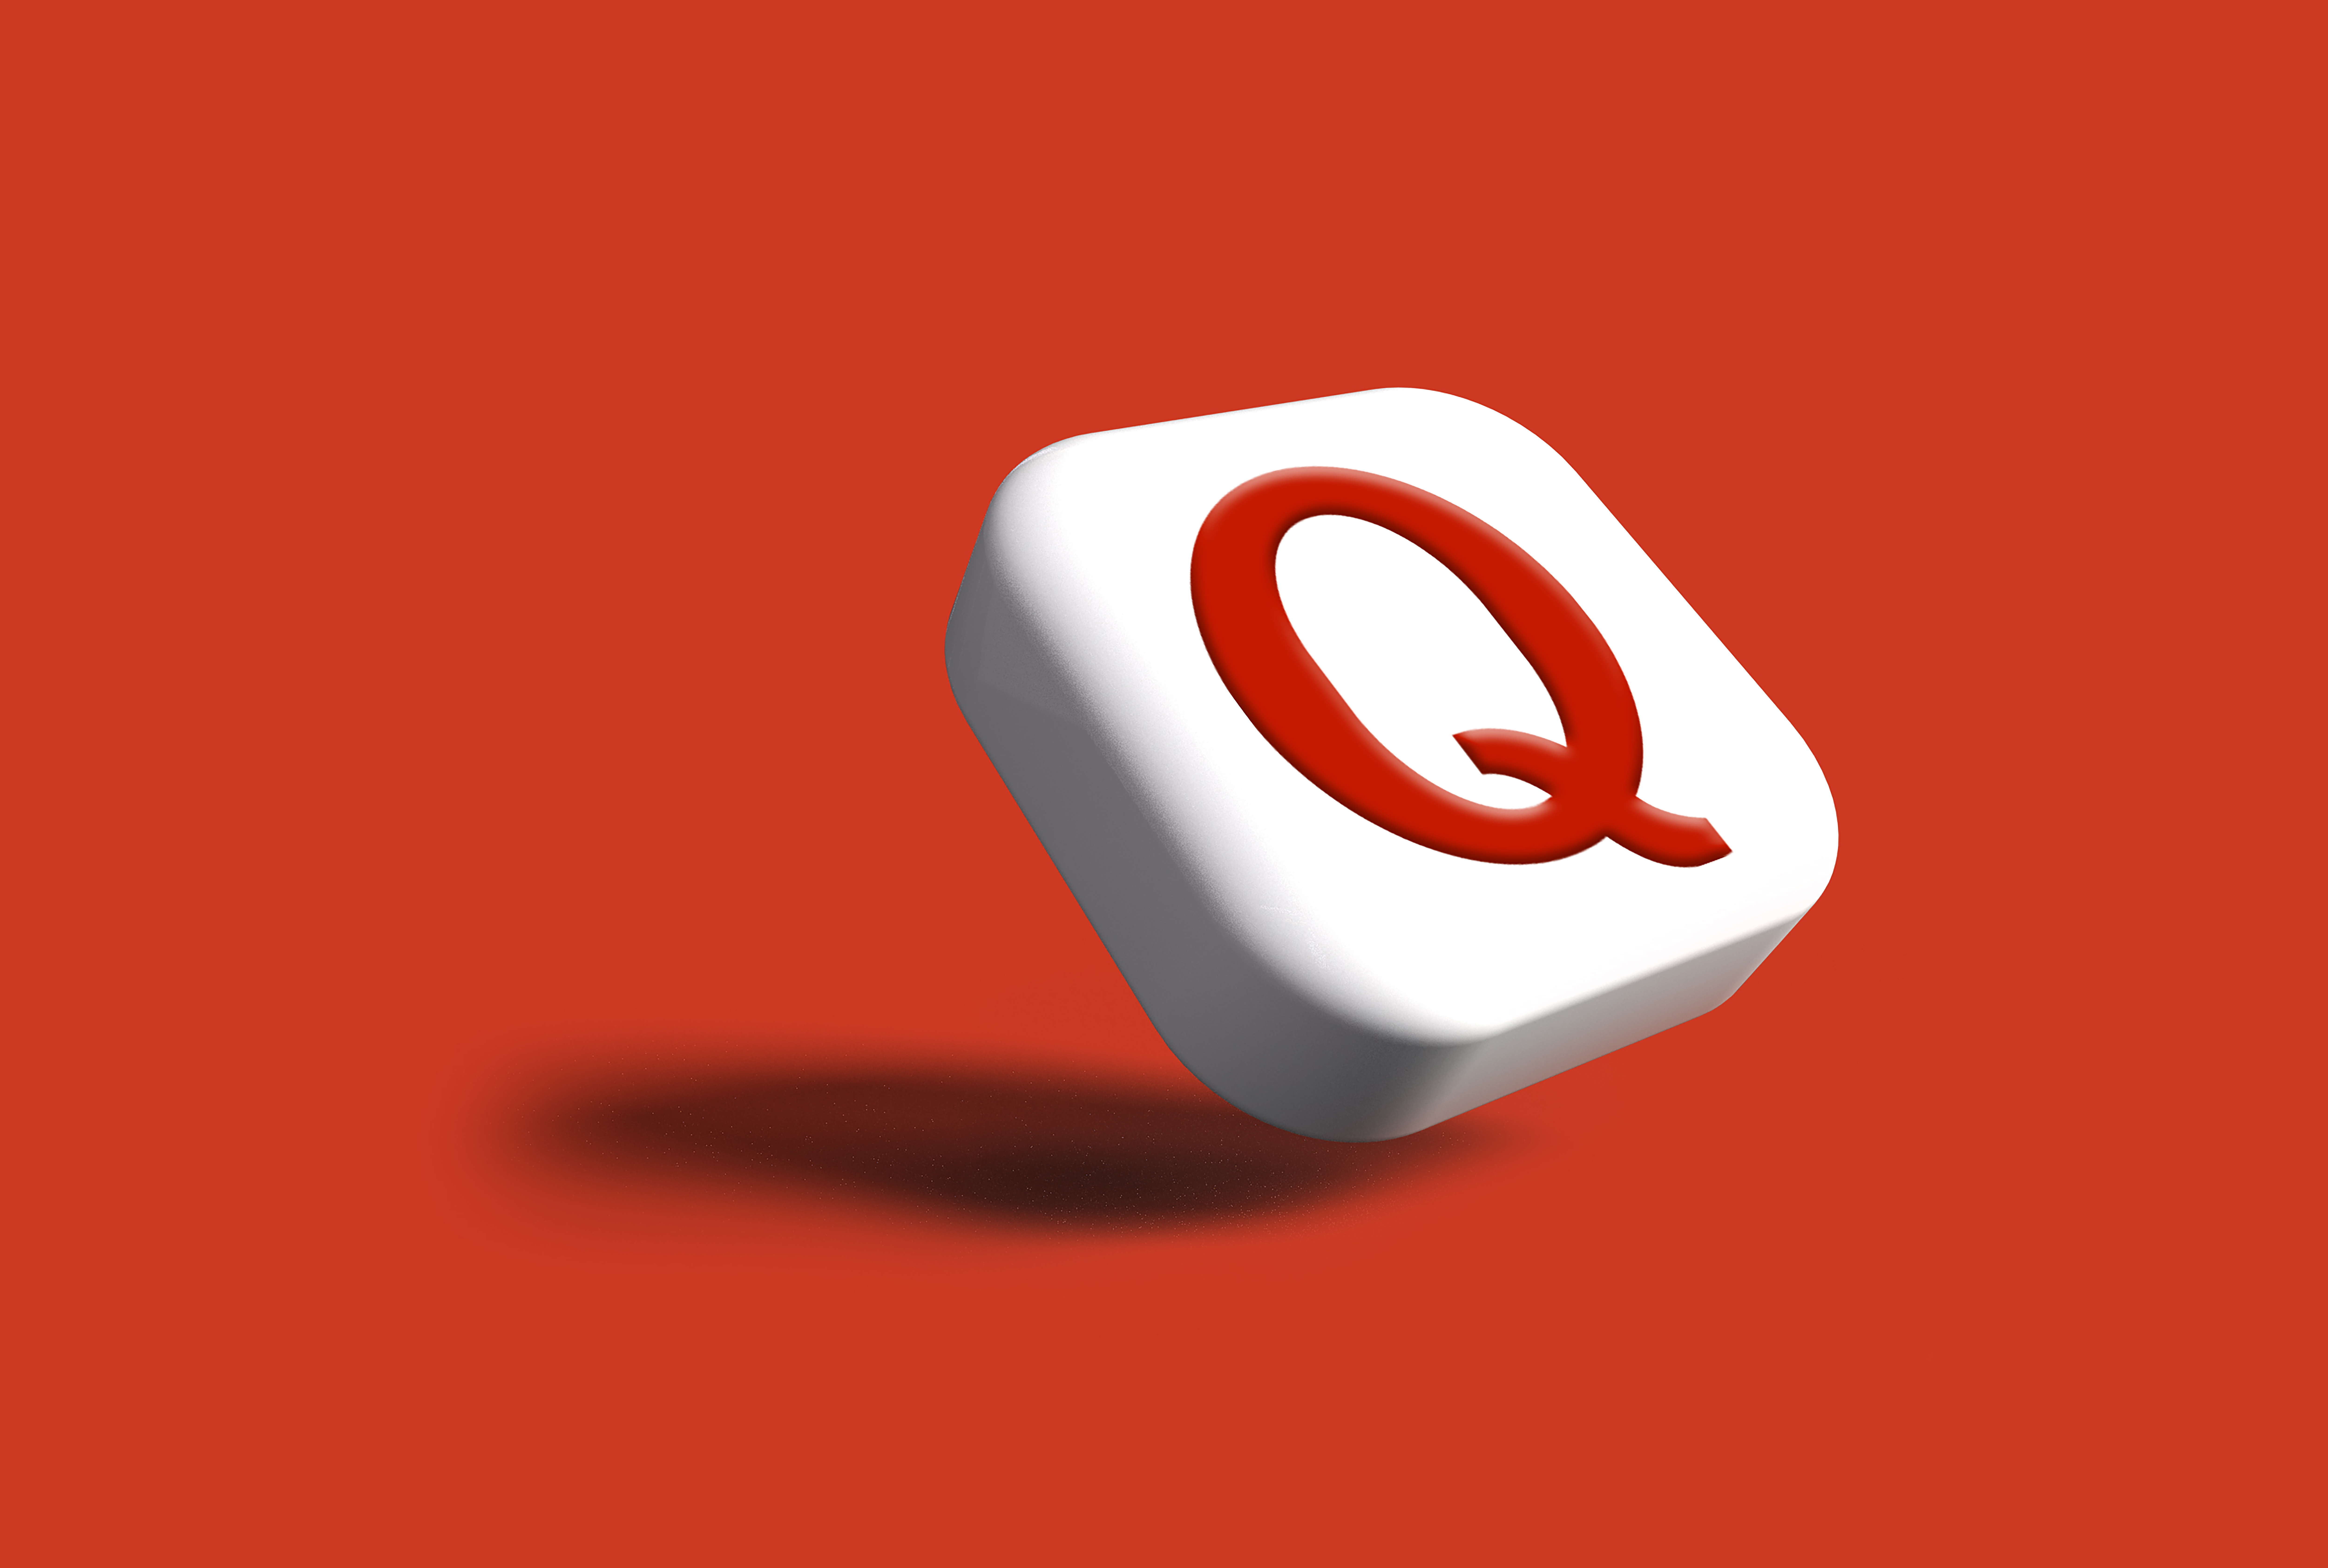 7 tips for marketing on Quora and other Q&A websites